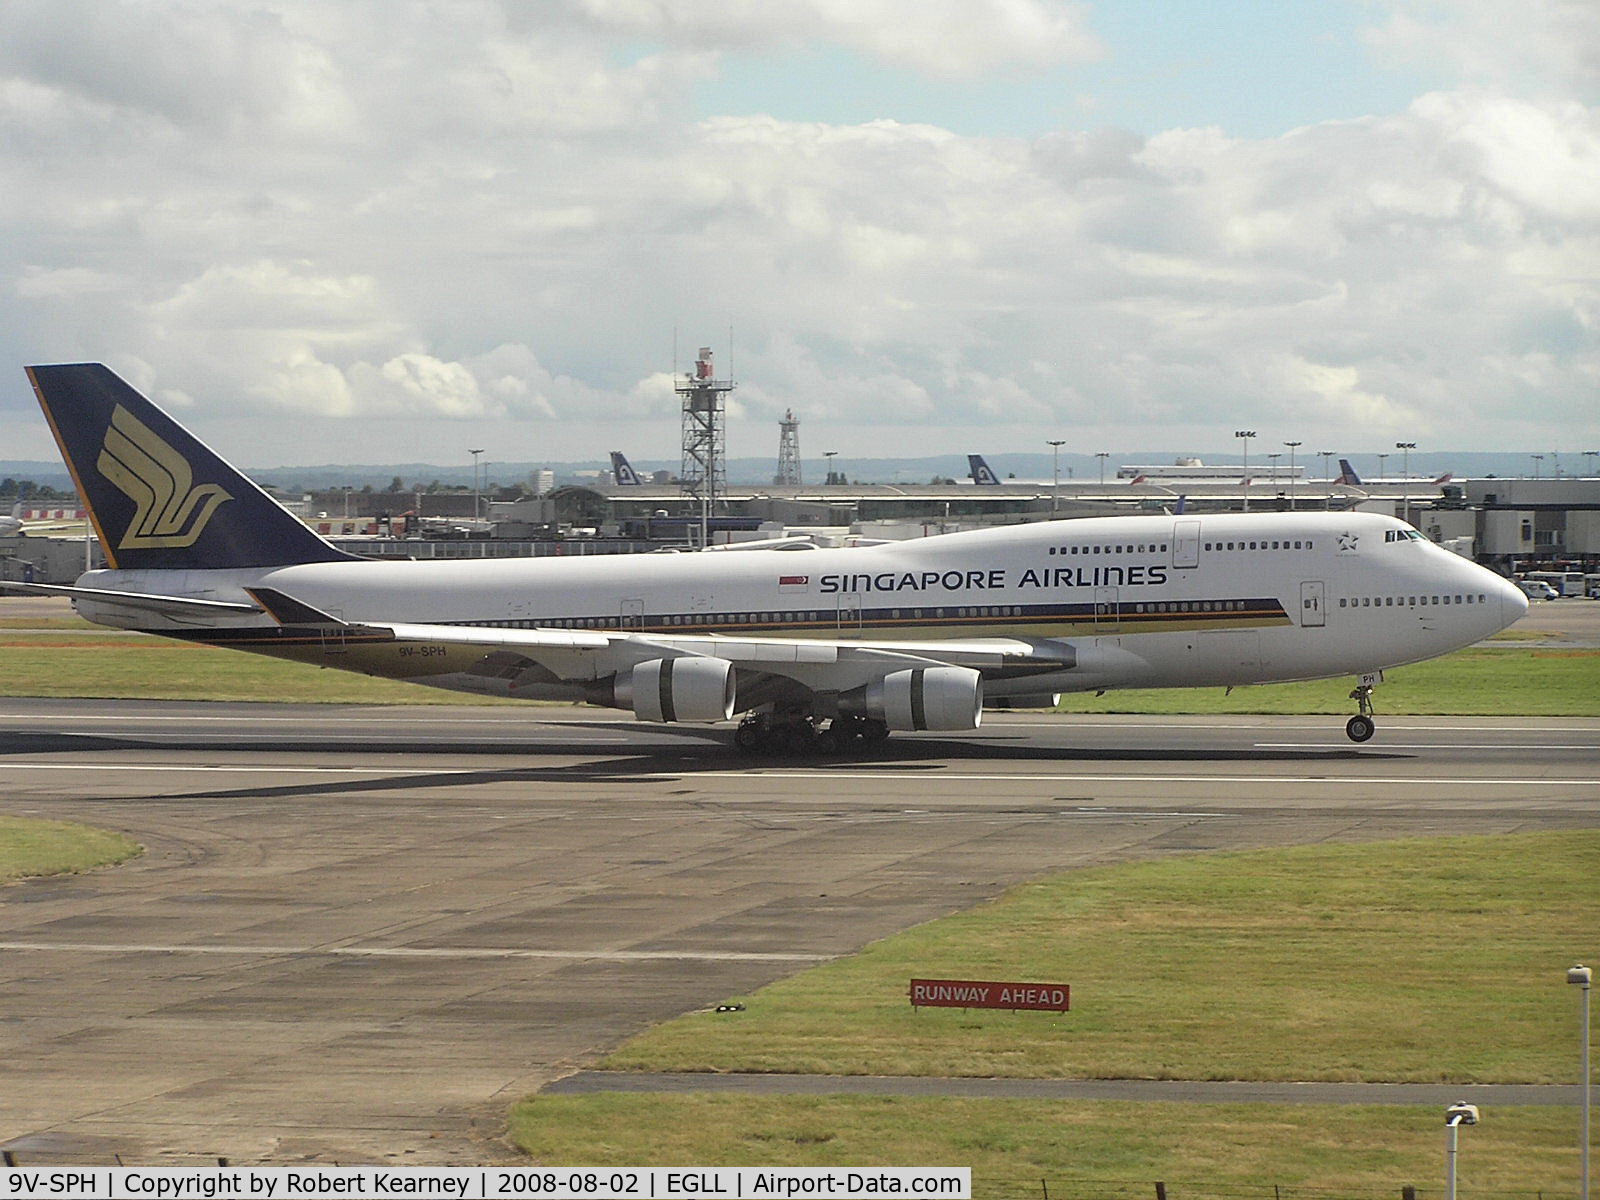 9V-SPH, 1996 Boeing 747-412 C/N 26555, Singapore after touch-down